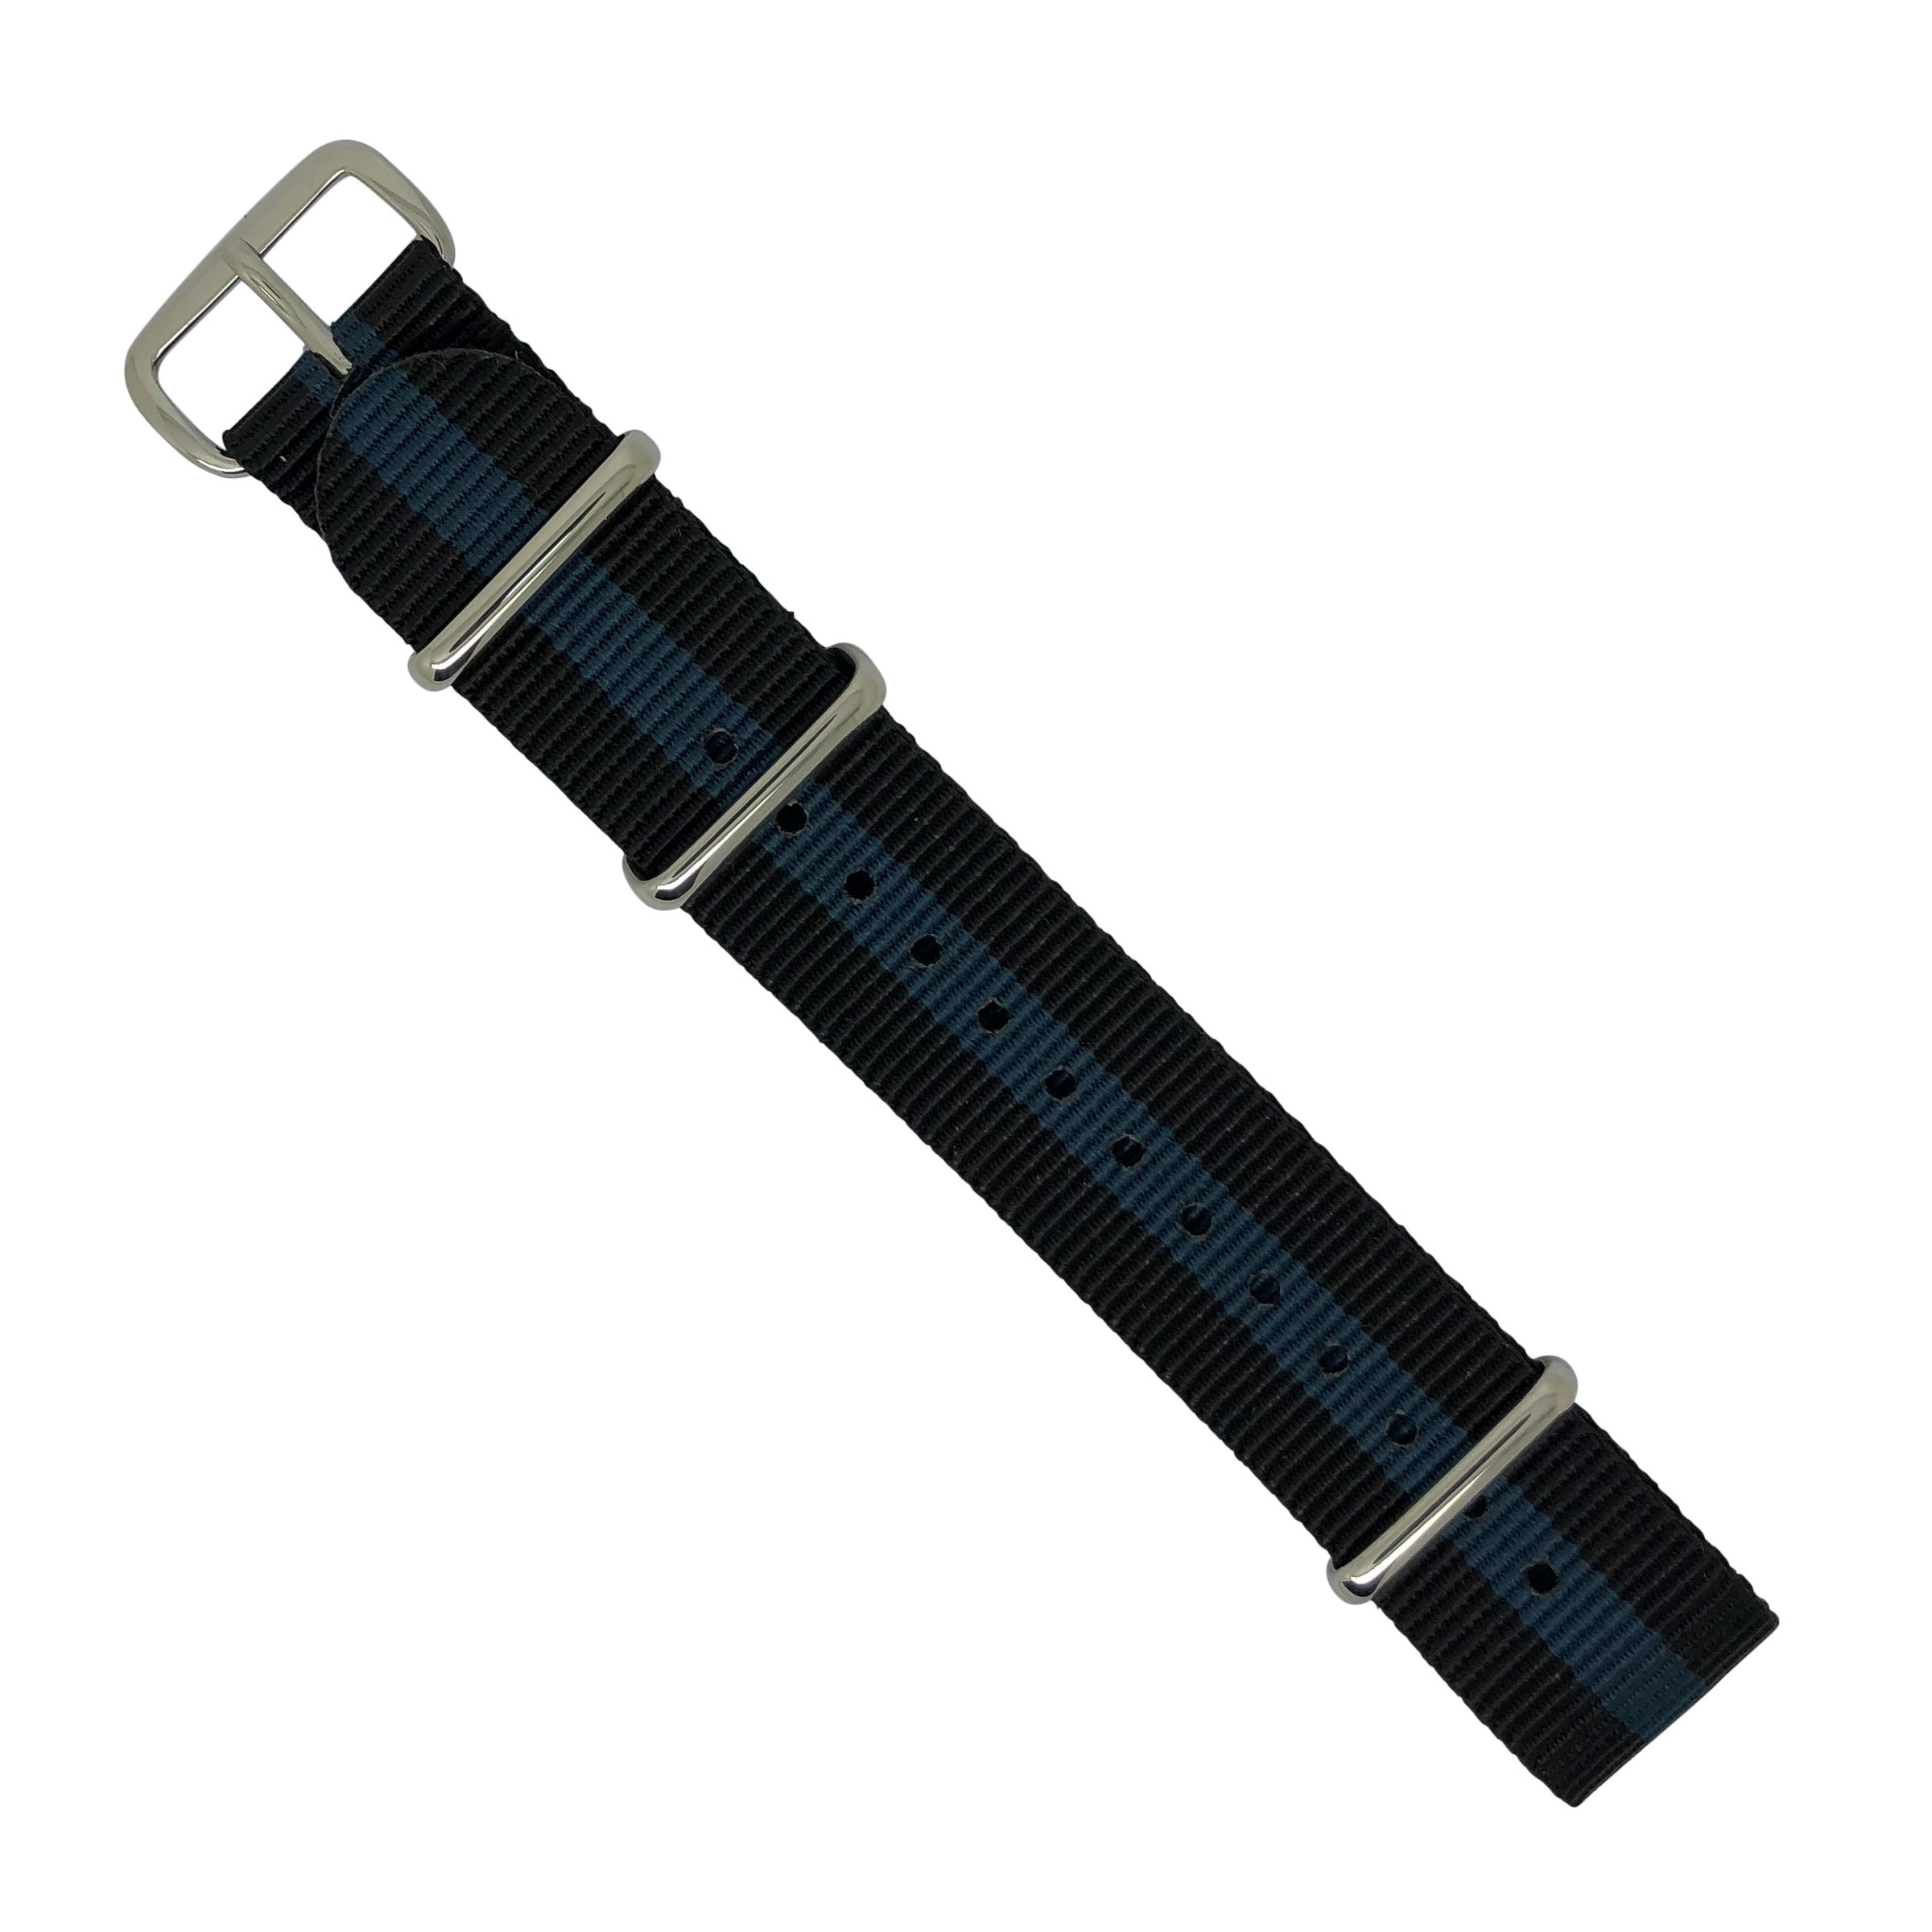 Premium Nato Strap in Black Blue with Polished Silver Buckle (20mm) - Nomad watch Works